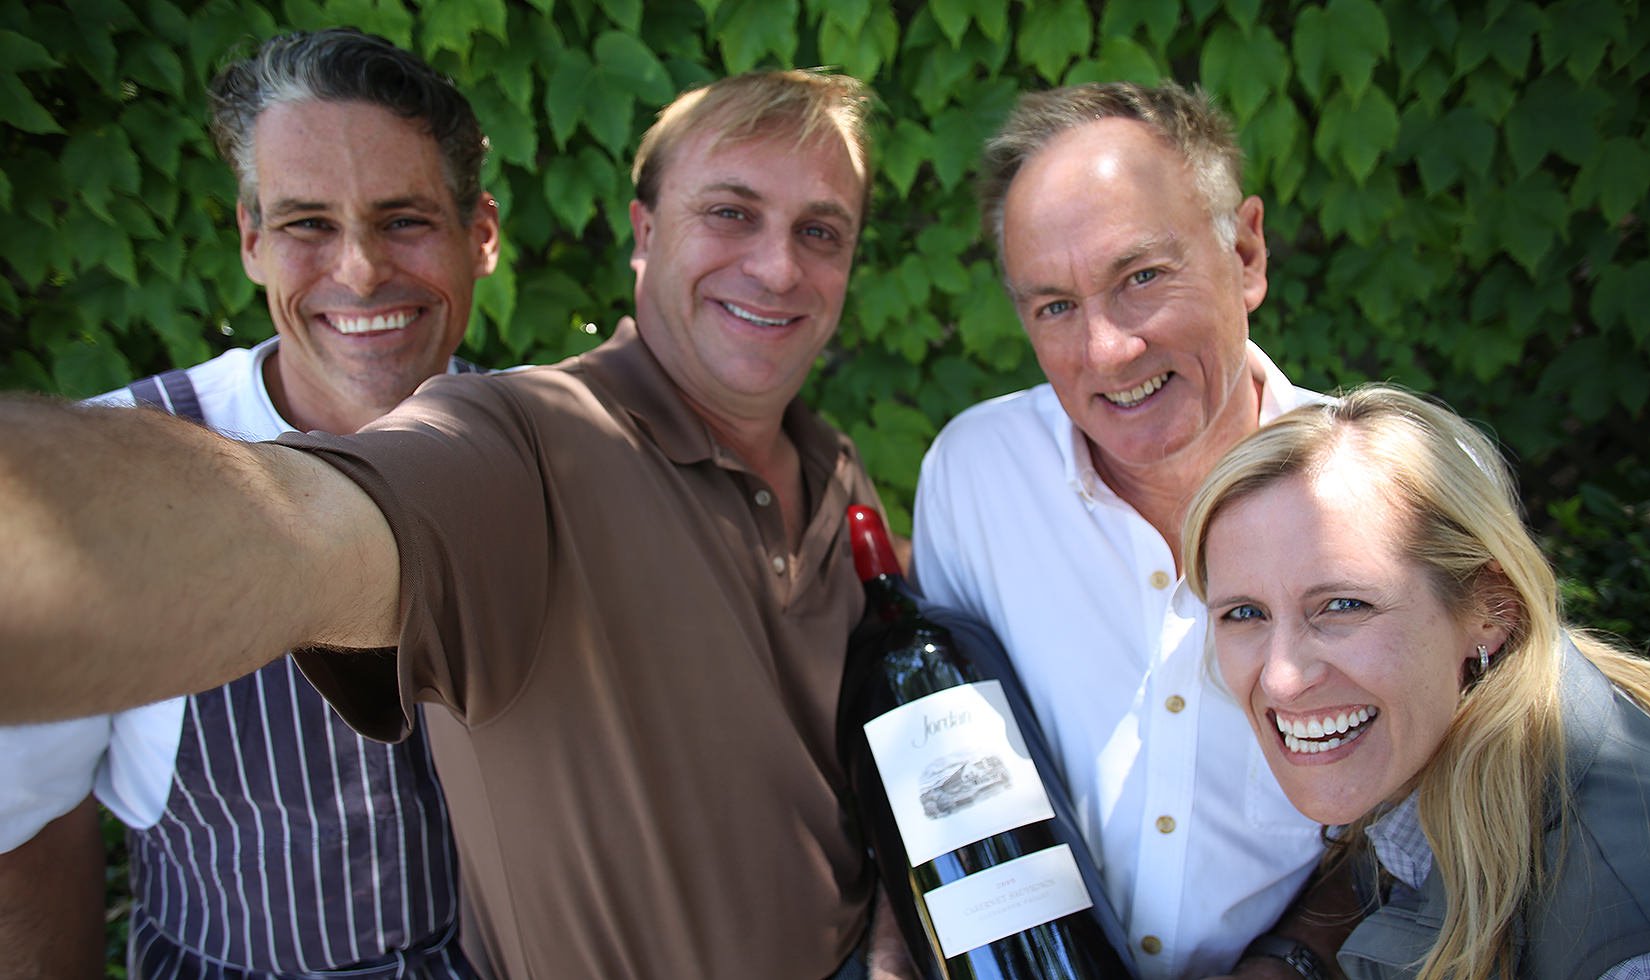 Todd Knoll, Executive Chef, John Jordan, CEO and proprietor, Rob Davis former Winemaker and Lisa Mattson, Director of Marketing and Communications for Jordan Winery taking a selfie together